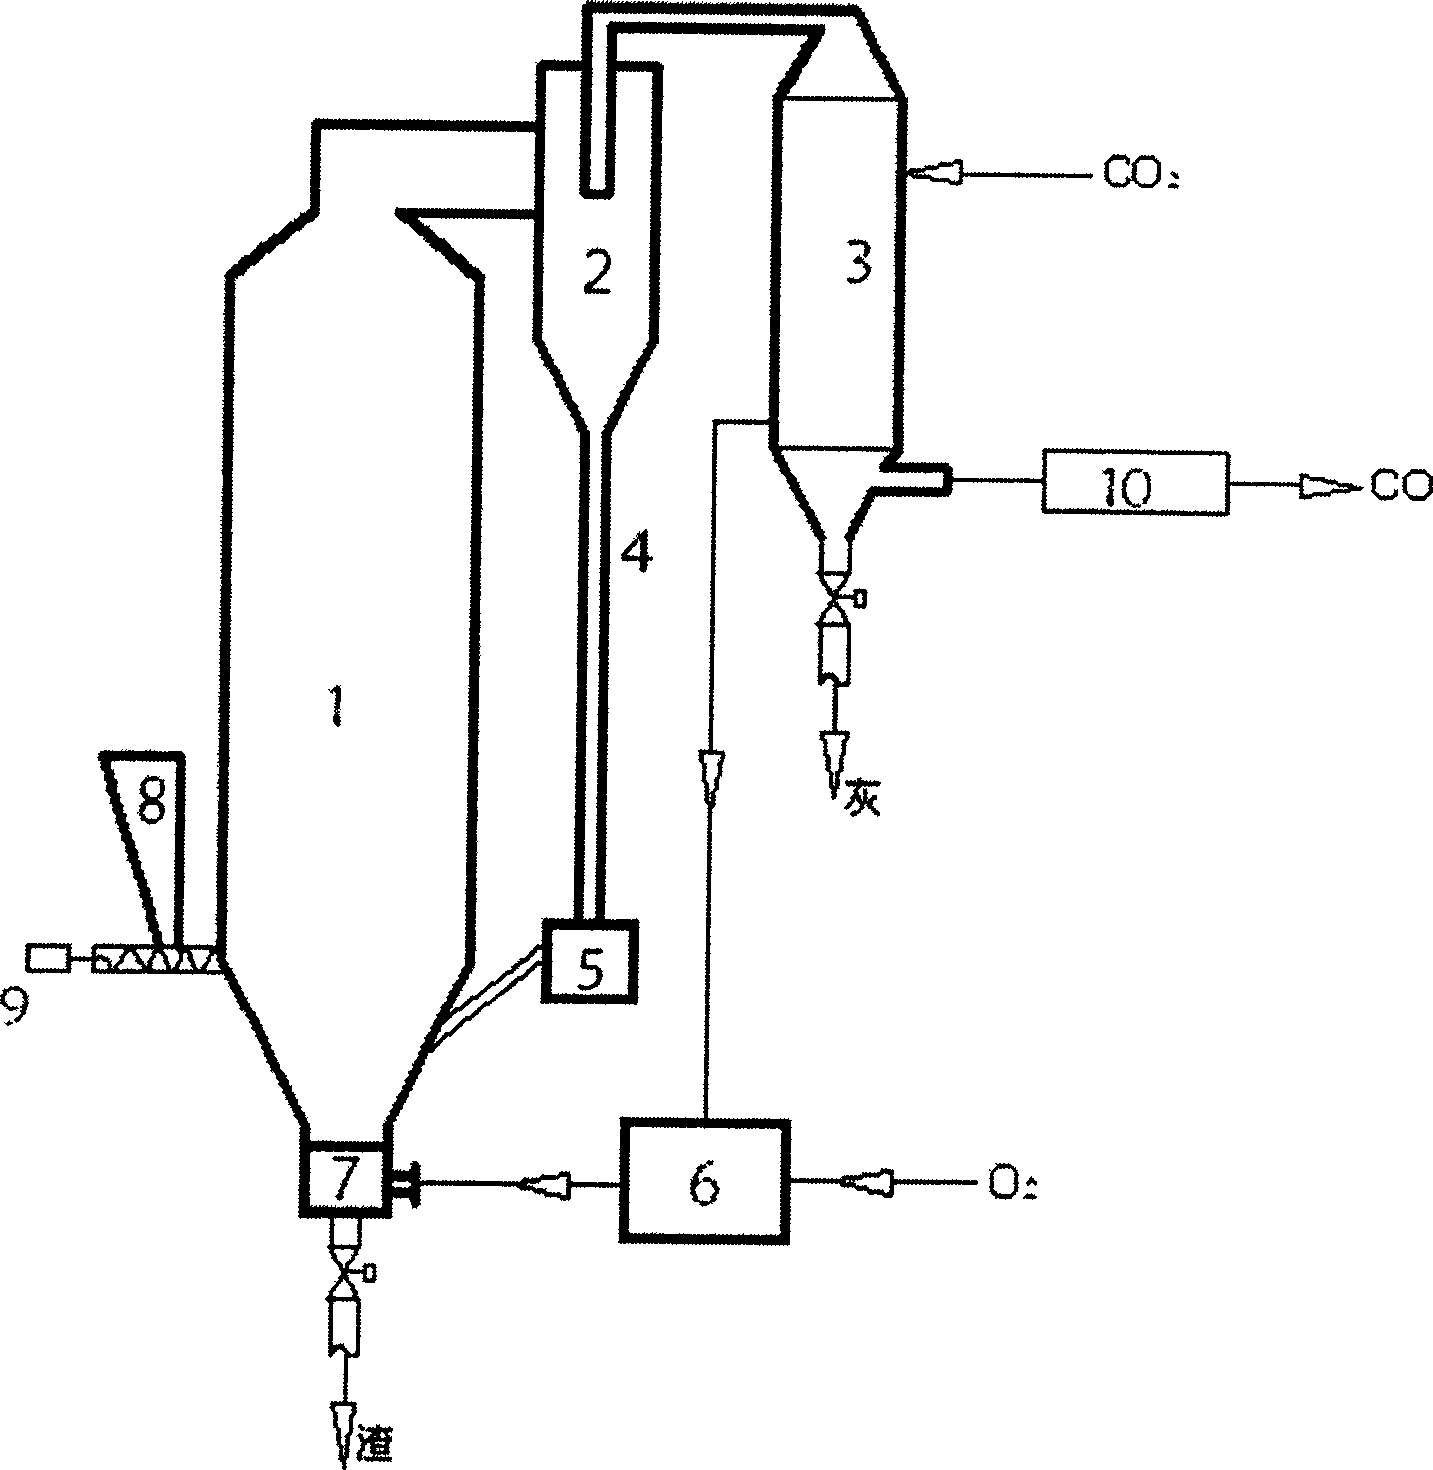 Technical process for gasification of fluidized-bed CO gasifying furnace and apparatus thereof